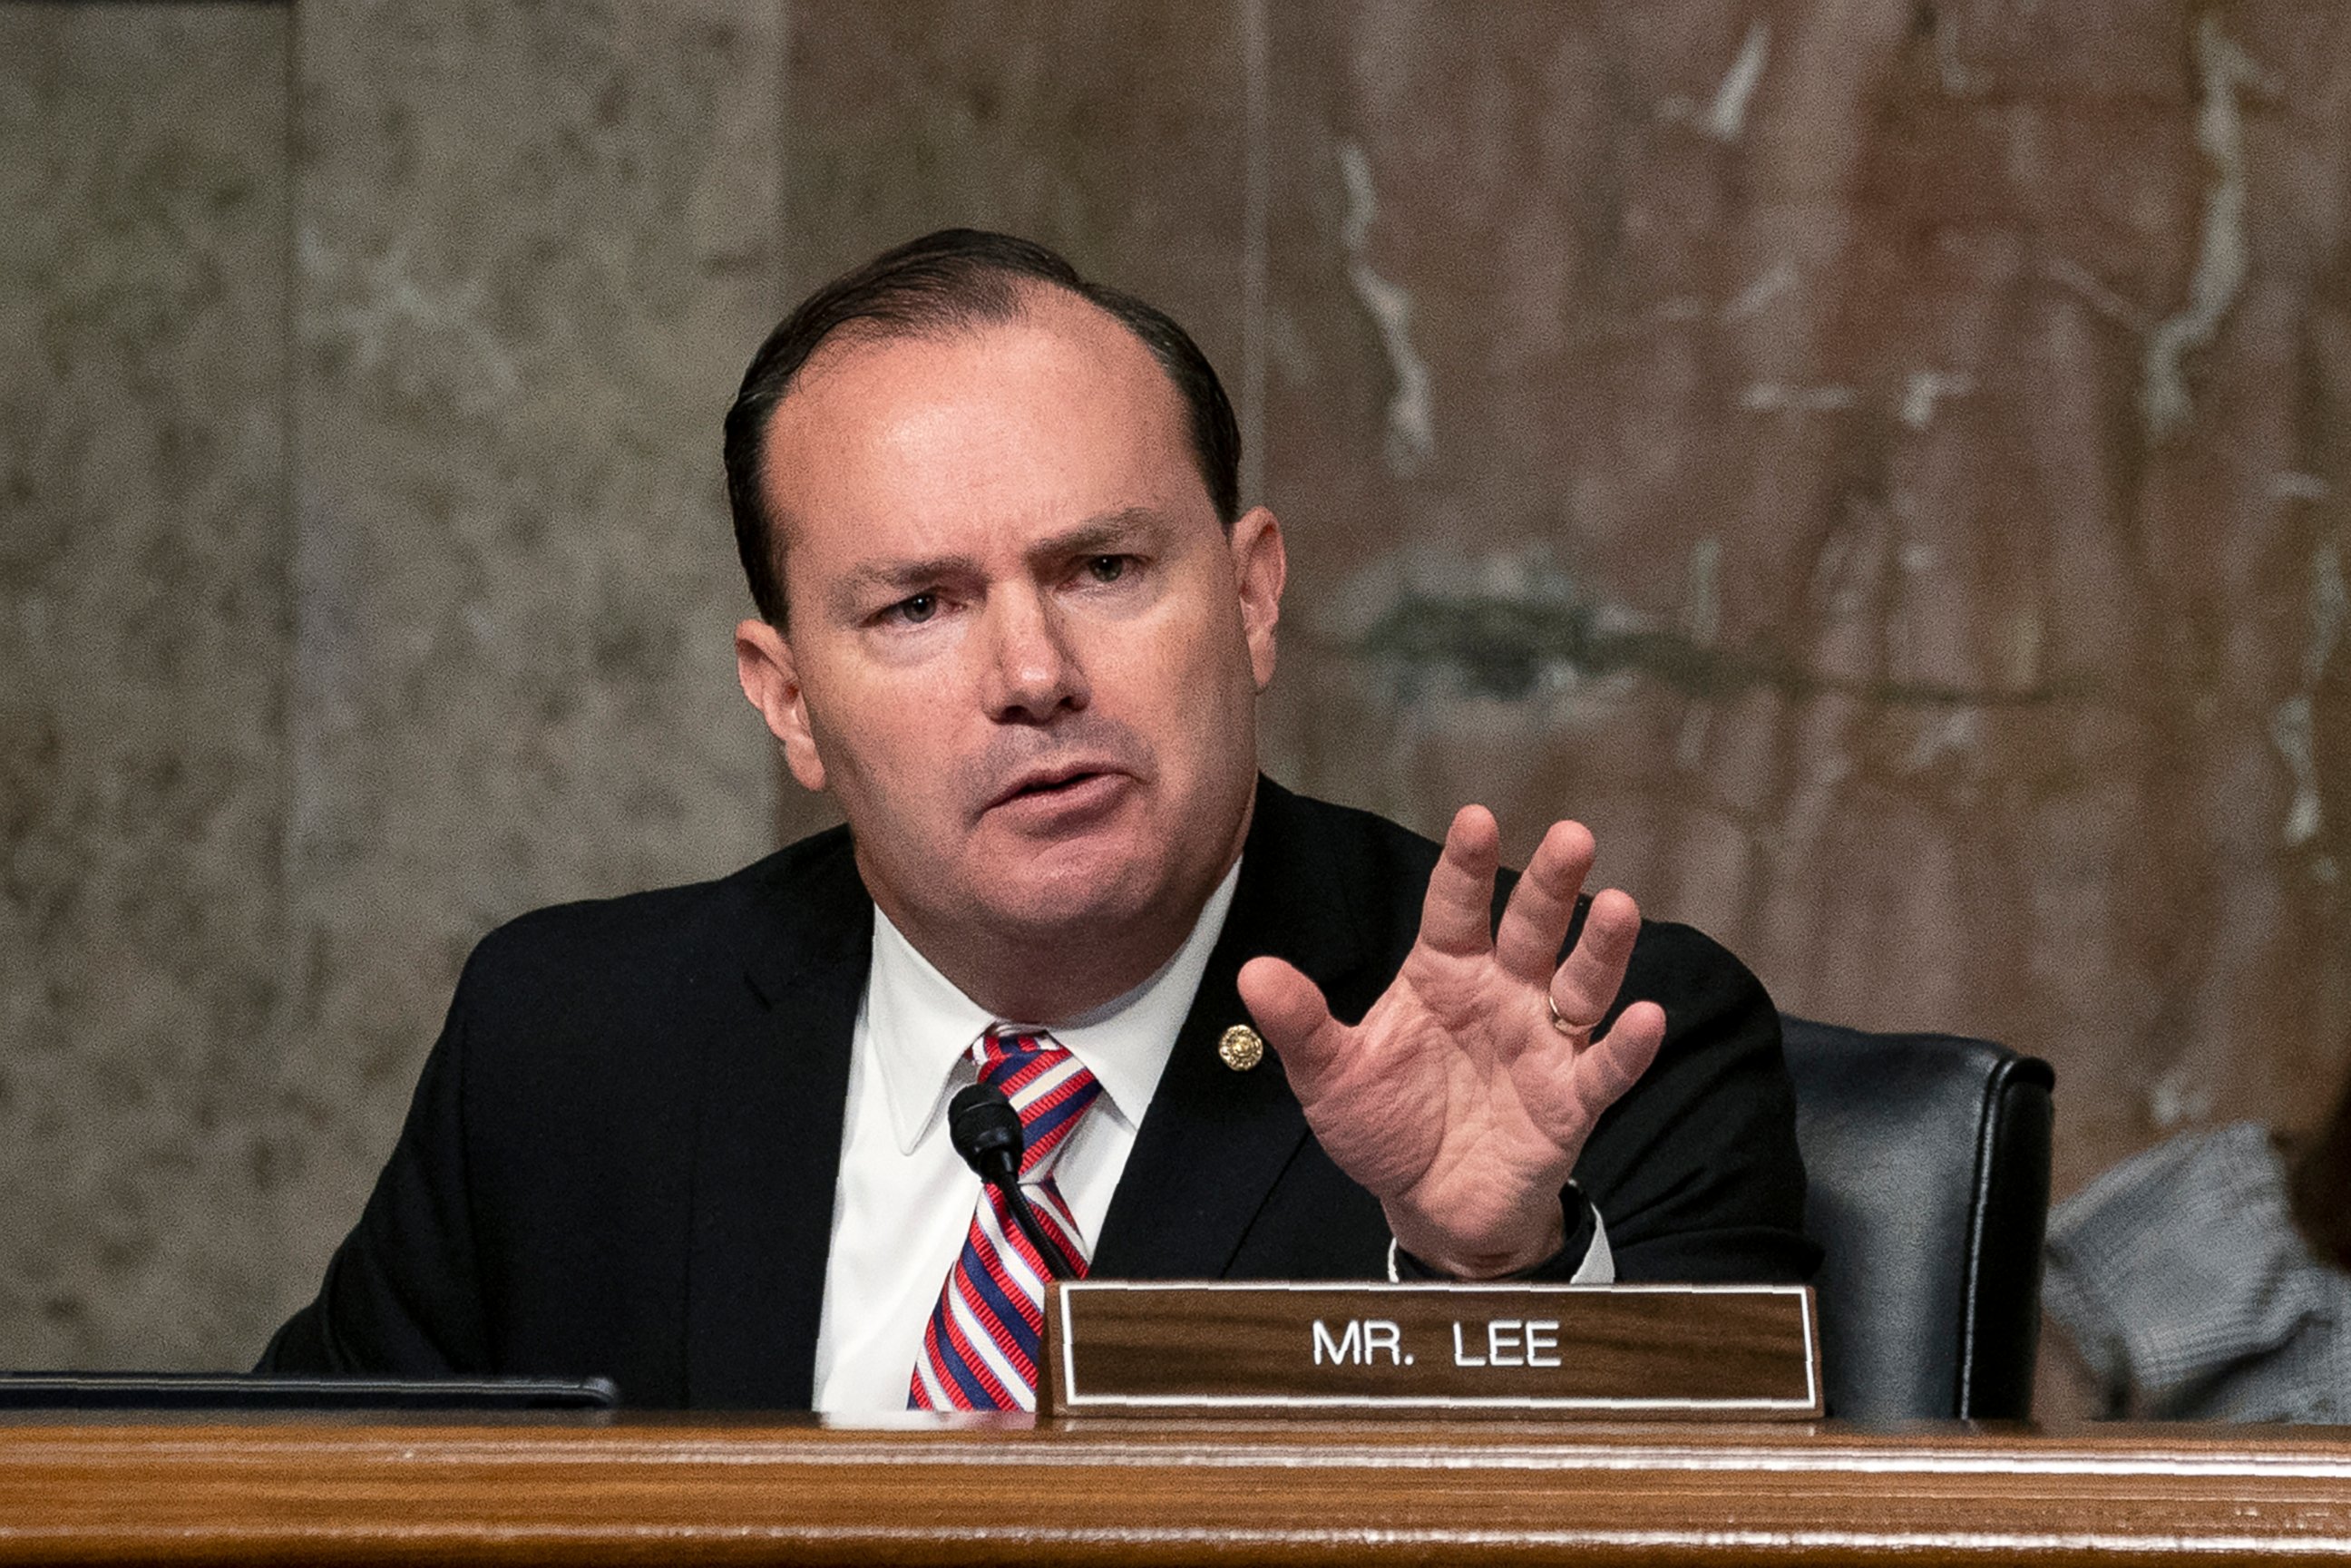 PHOTO: In this Sept. 30, 2020 file photo, Sen. Mike Lee, R-Utah, speaks during a Senate Judiciary Committee hearing on Capitol Hill in Washington to examine the FBI "Crossfire Hurricane" investigation.